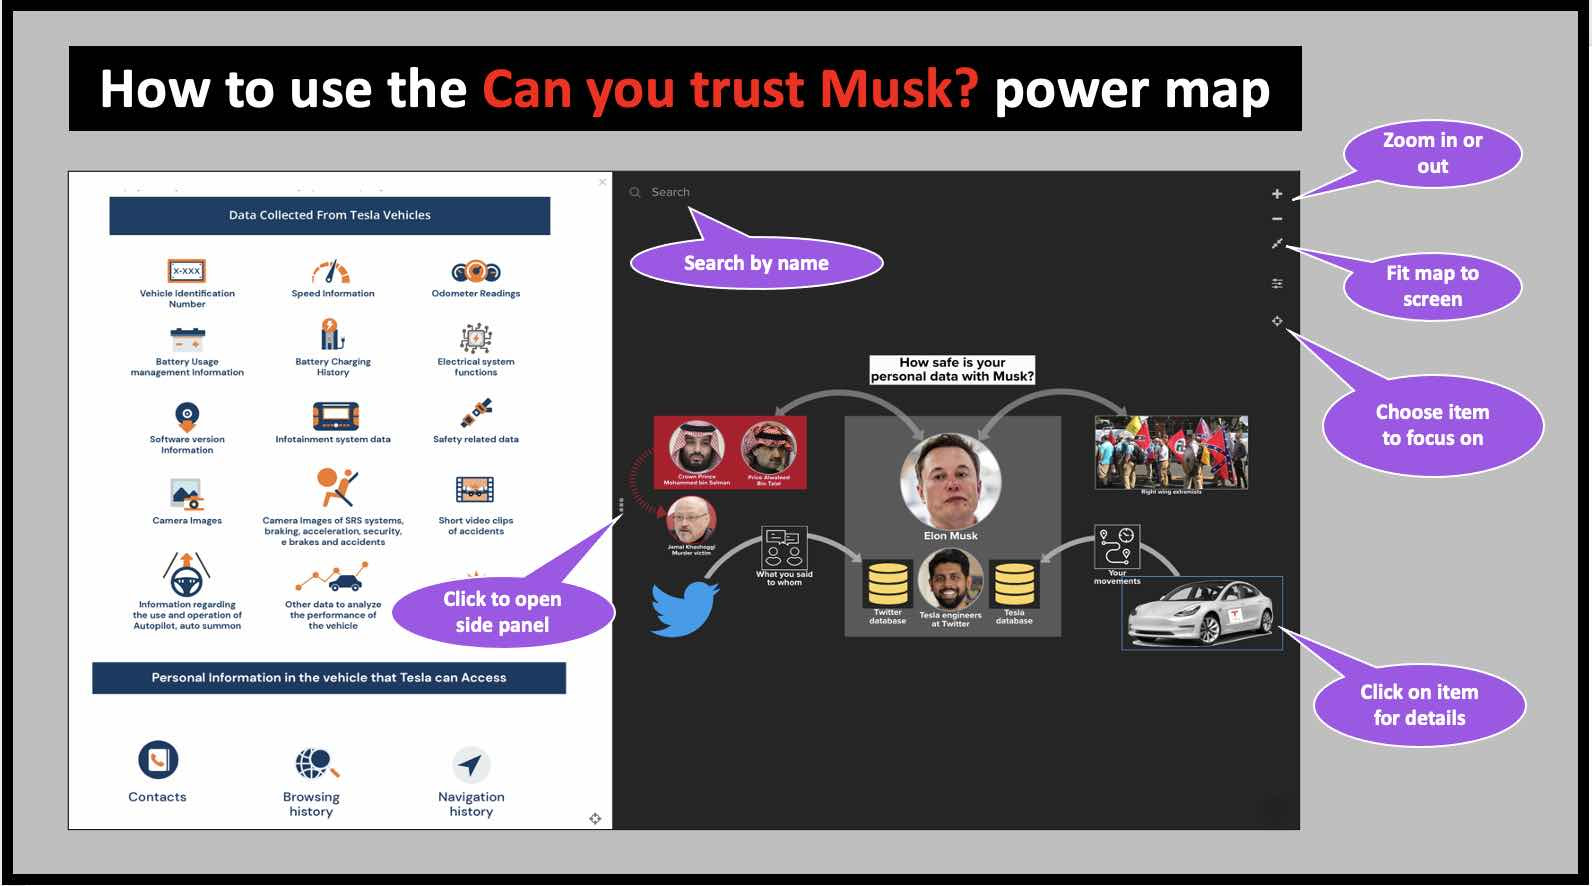 How to use the Can You Trust Musk power map